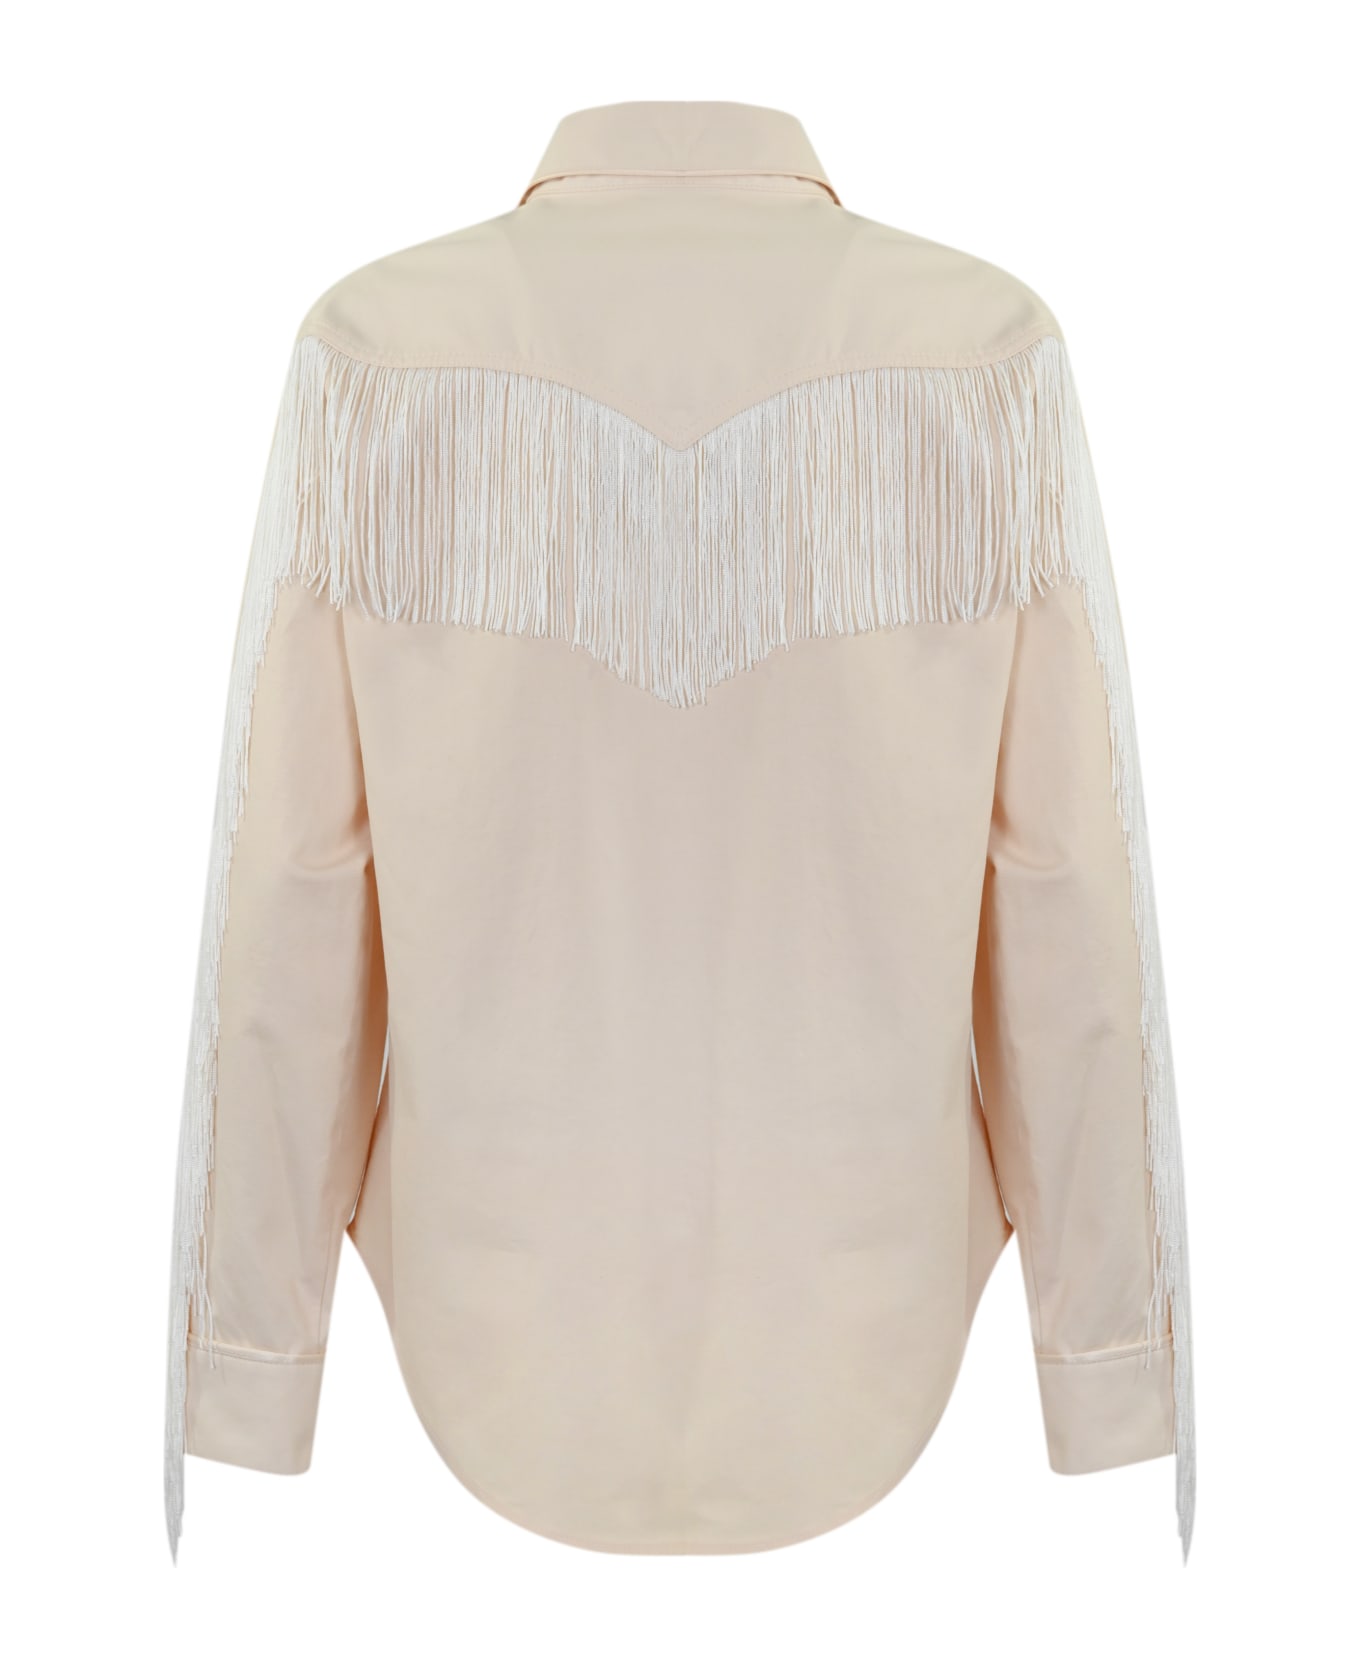 Pinko Wolf Shirt With Fringes - Rosa シャツ